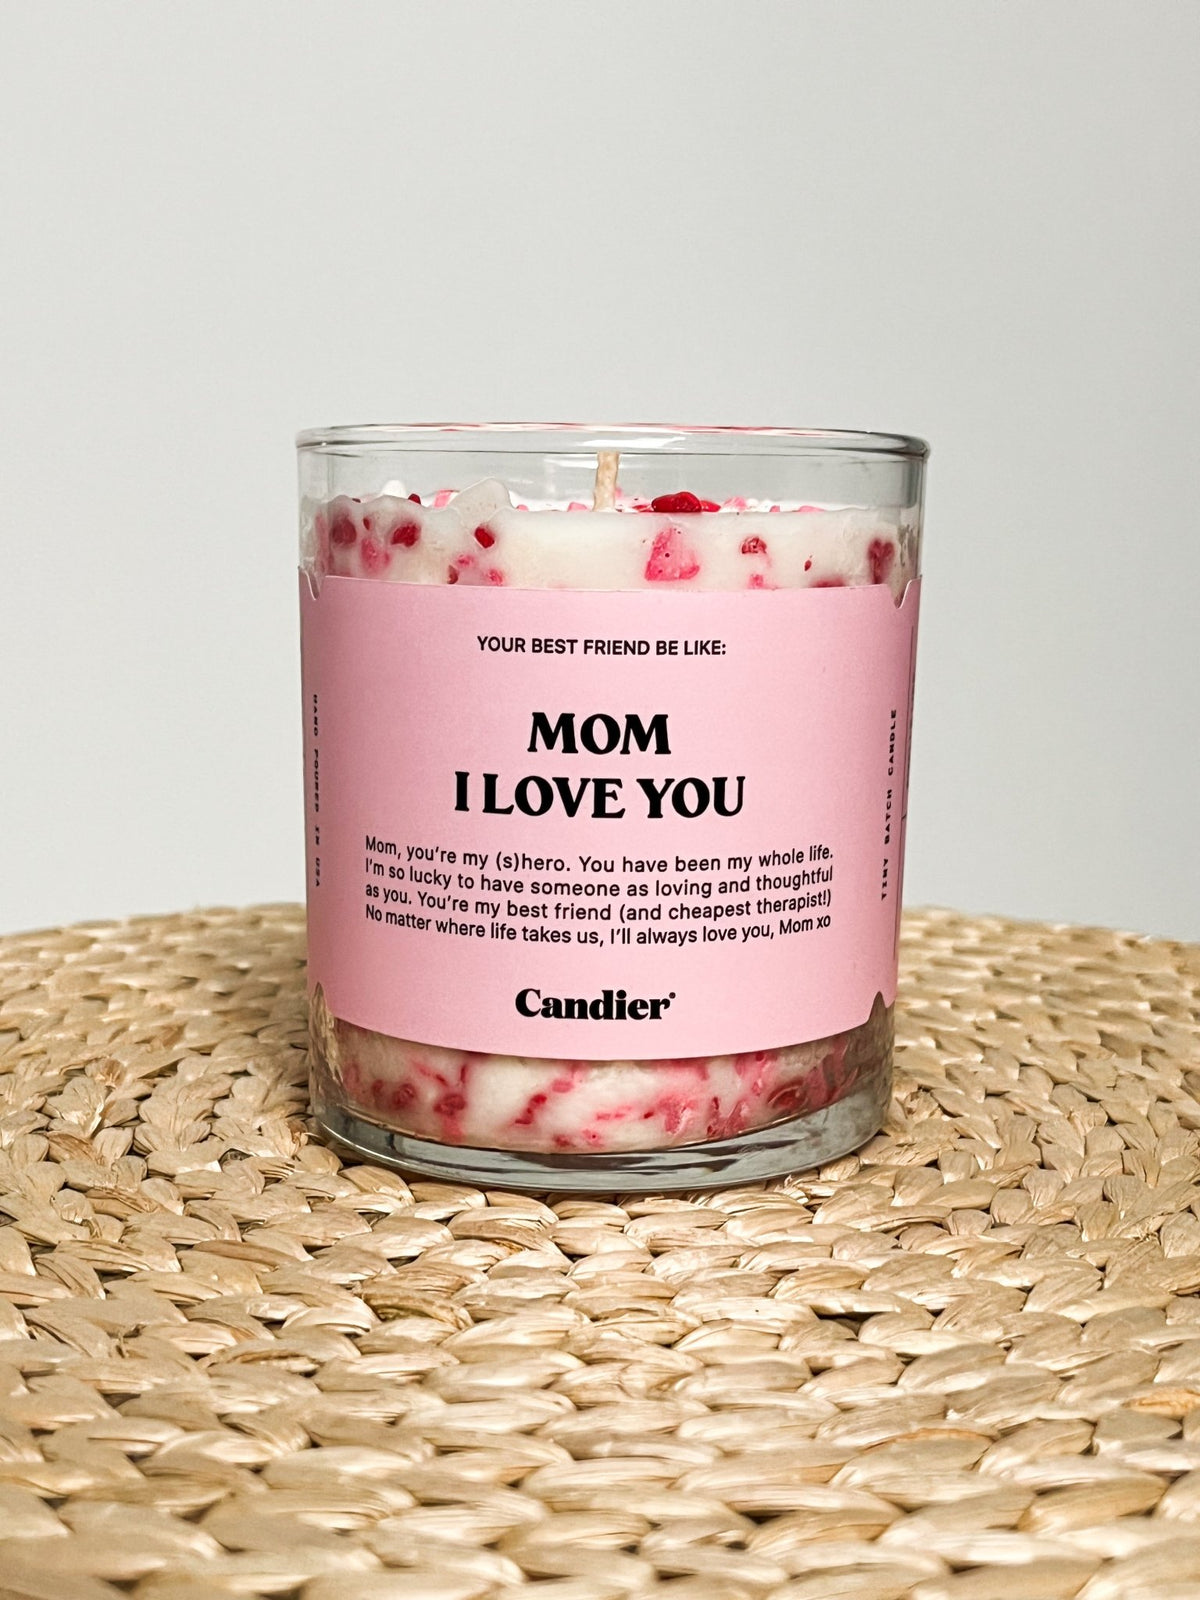 Mom I love you candle 9 oz - Stylish candle - Trendy Gifts for Mom at Lush Fashion Lounge in Oklahoma